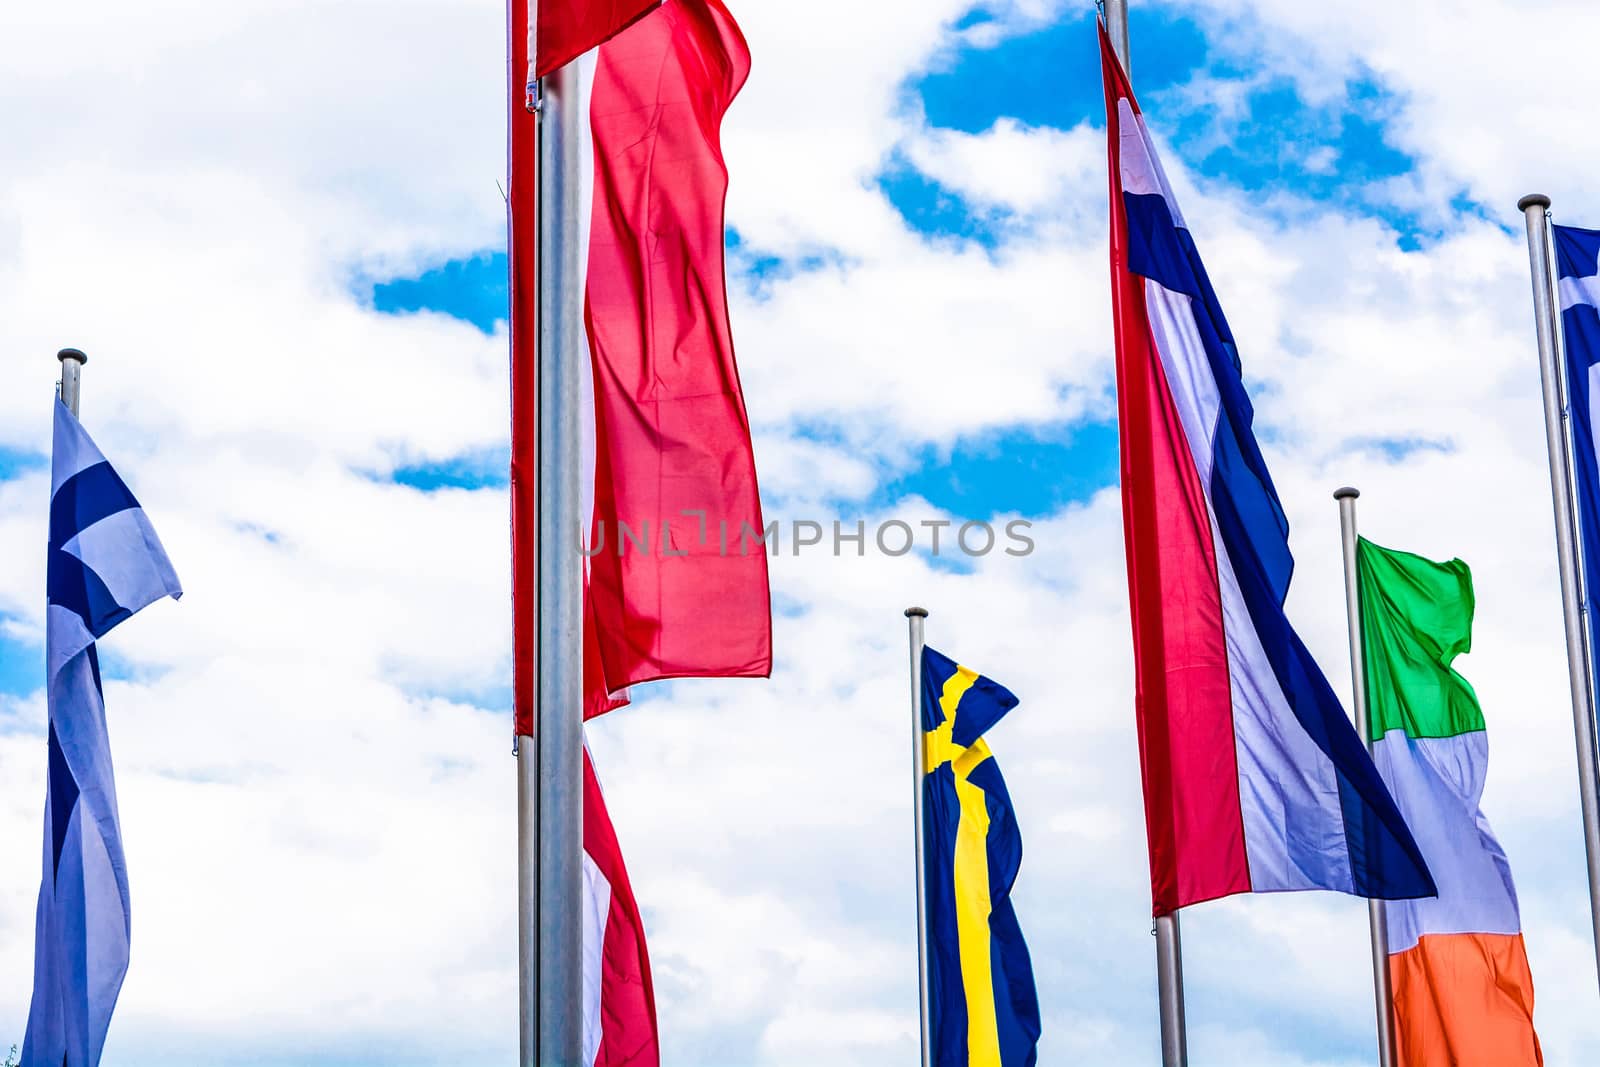 Several Europe countries flags arranged in front of a blue sky.